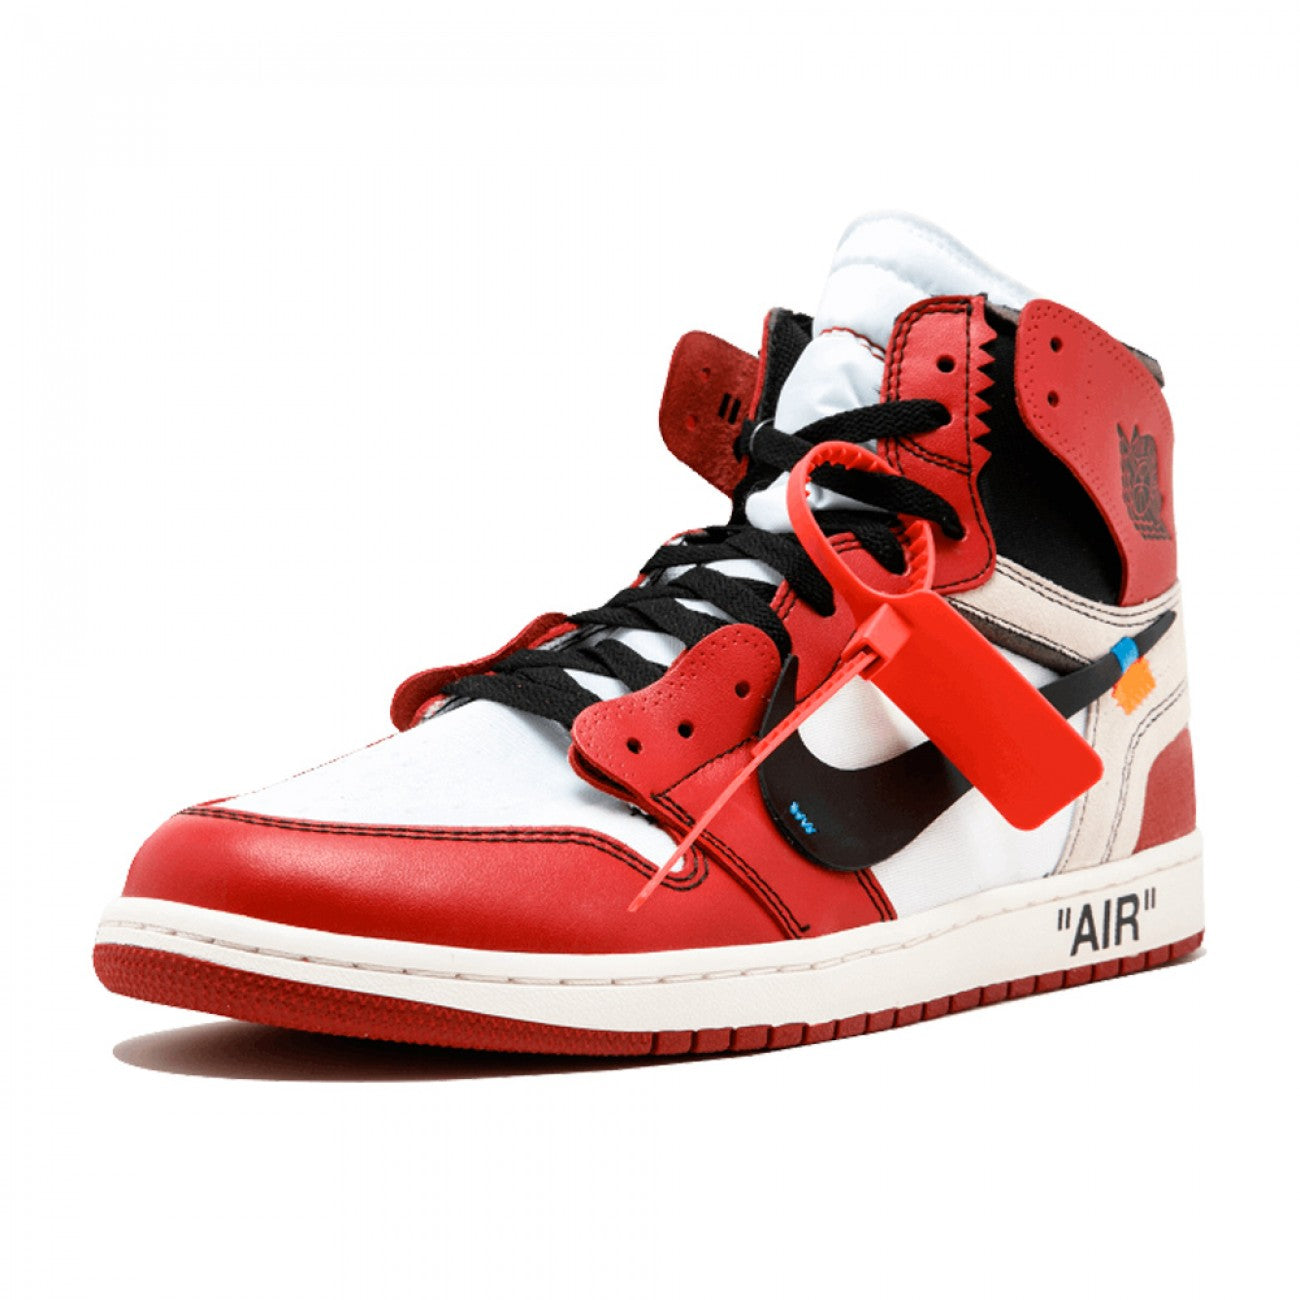 Fashion Drops on X: Unreleased Off-White x Nike Air Jordan 4 Bred designed  by late Virgil Abloh 🕊  / X